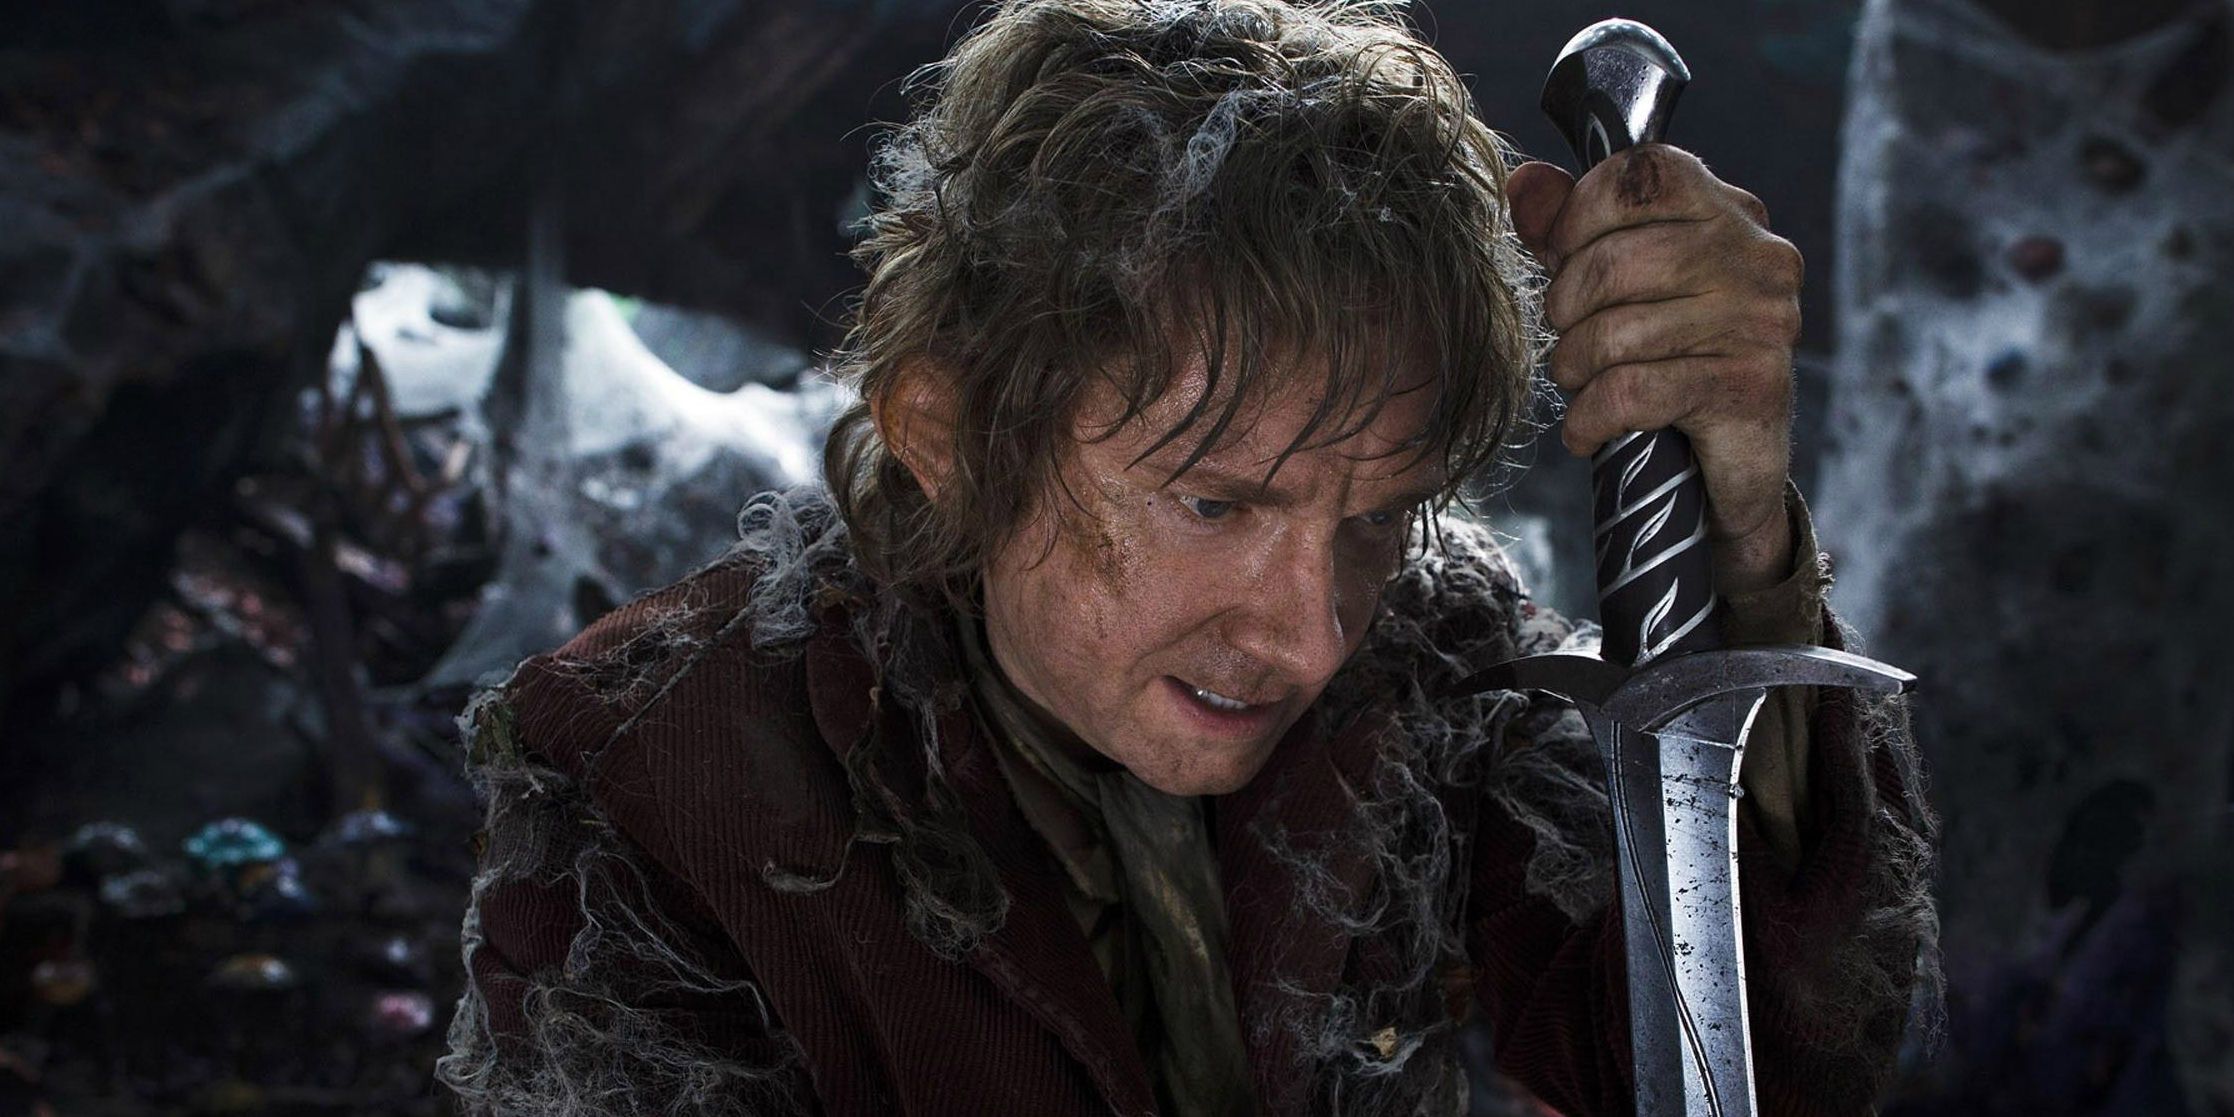 Bilbo with his sword Sting in The Hobbit